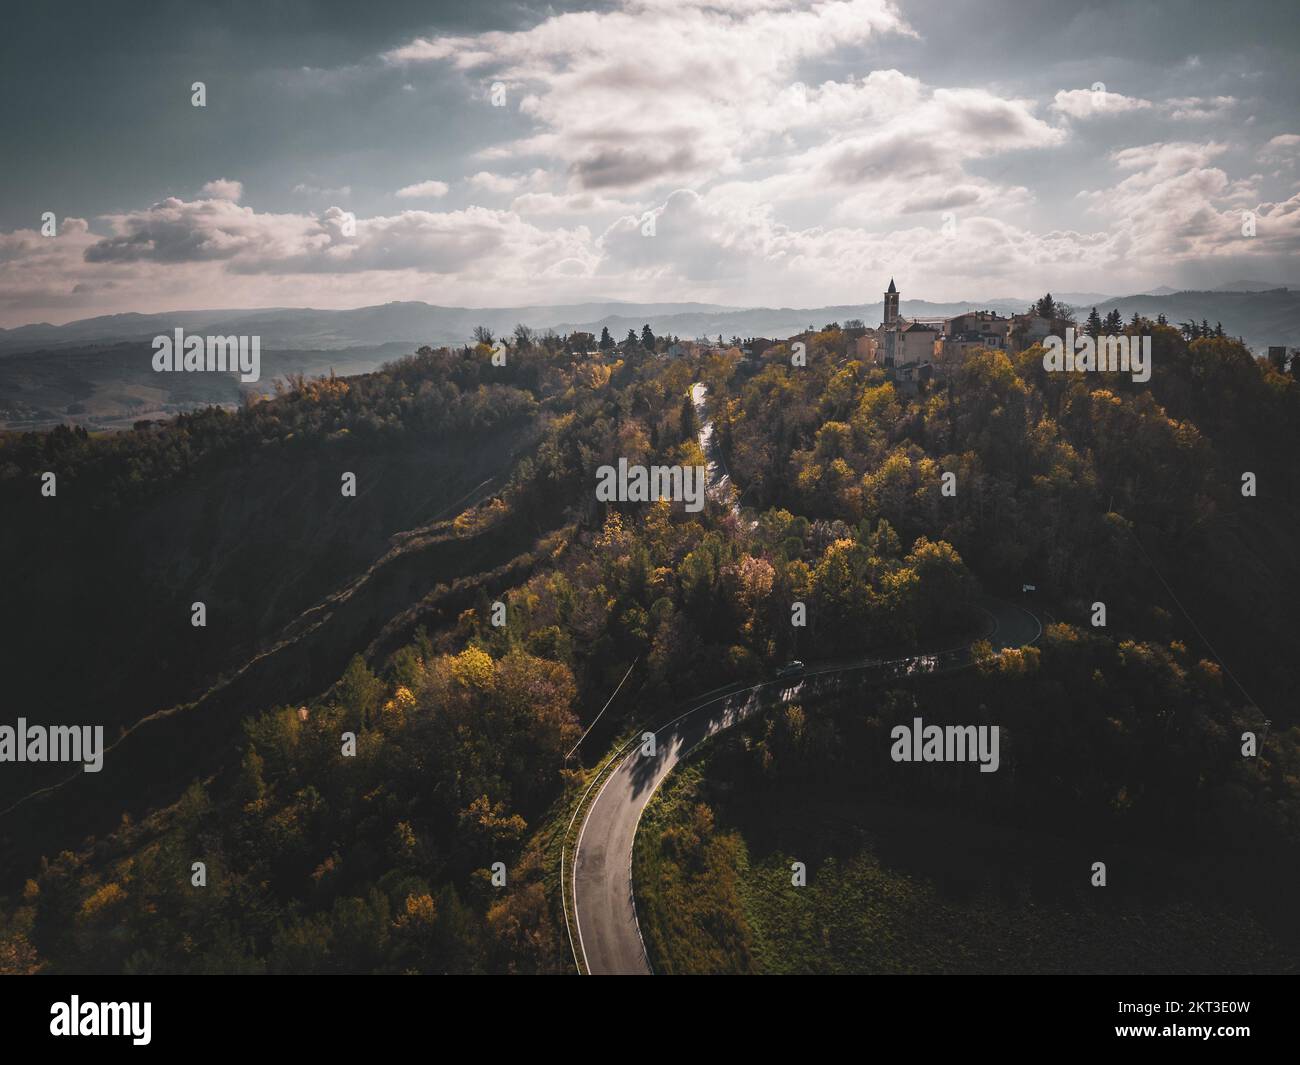 aerial view of a scenic road in a hilly area Stock Photo